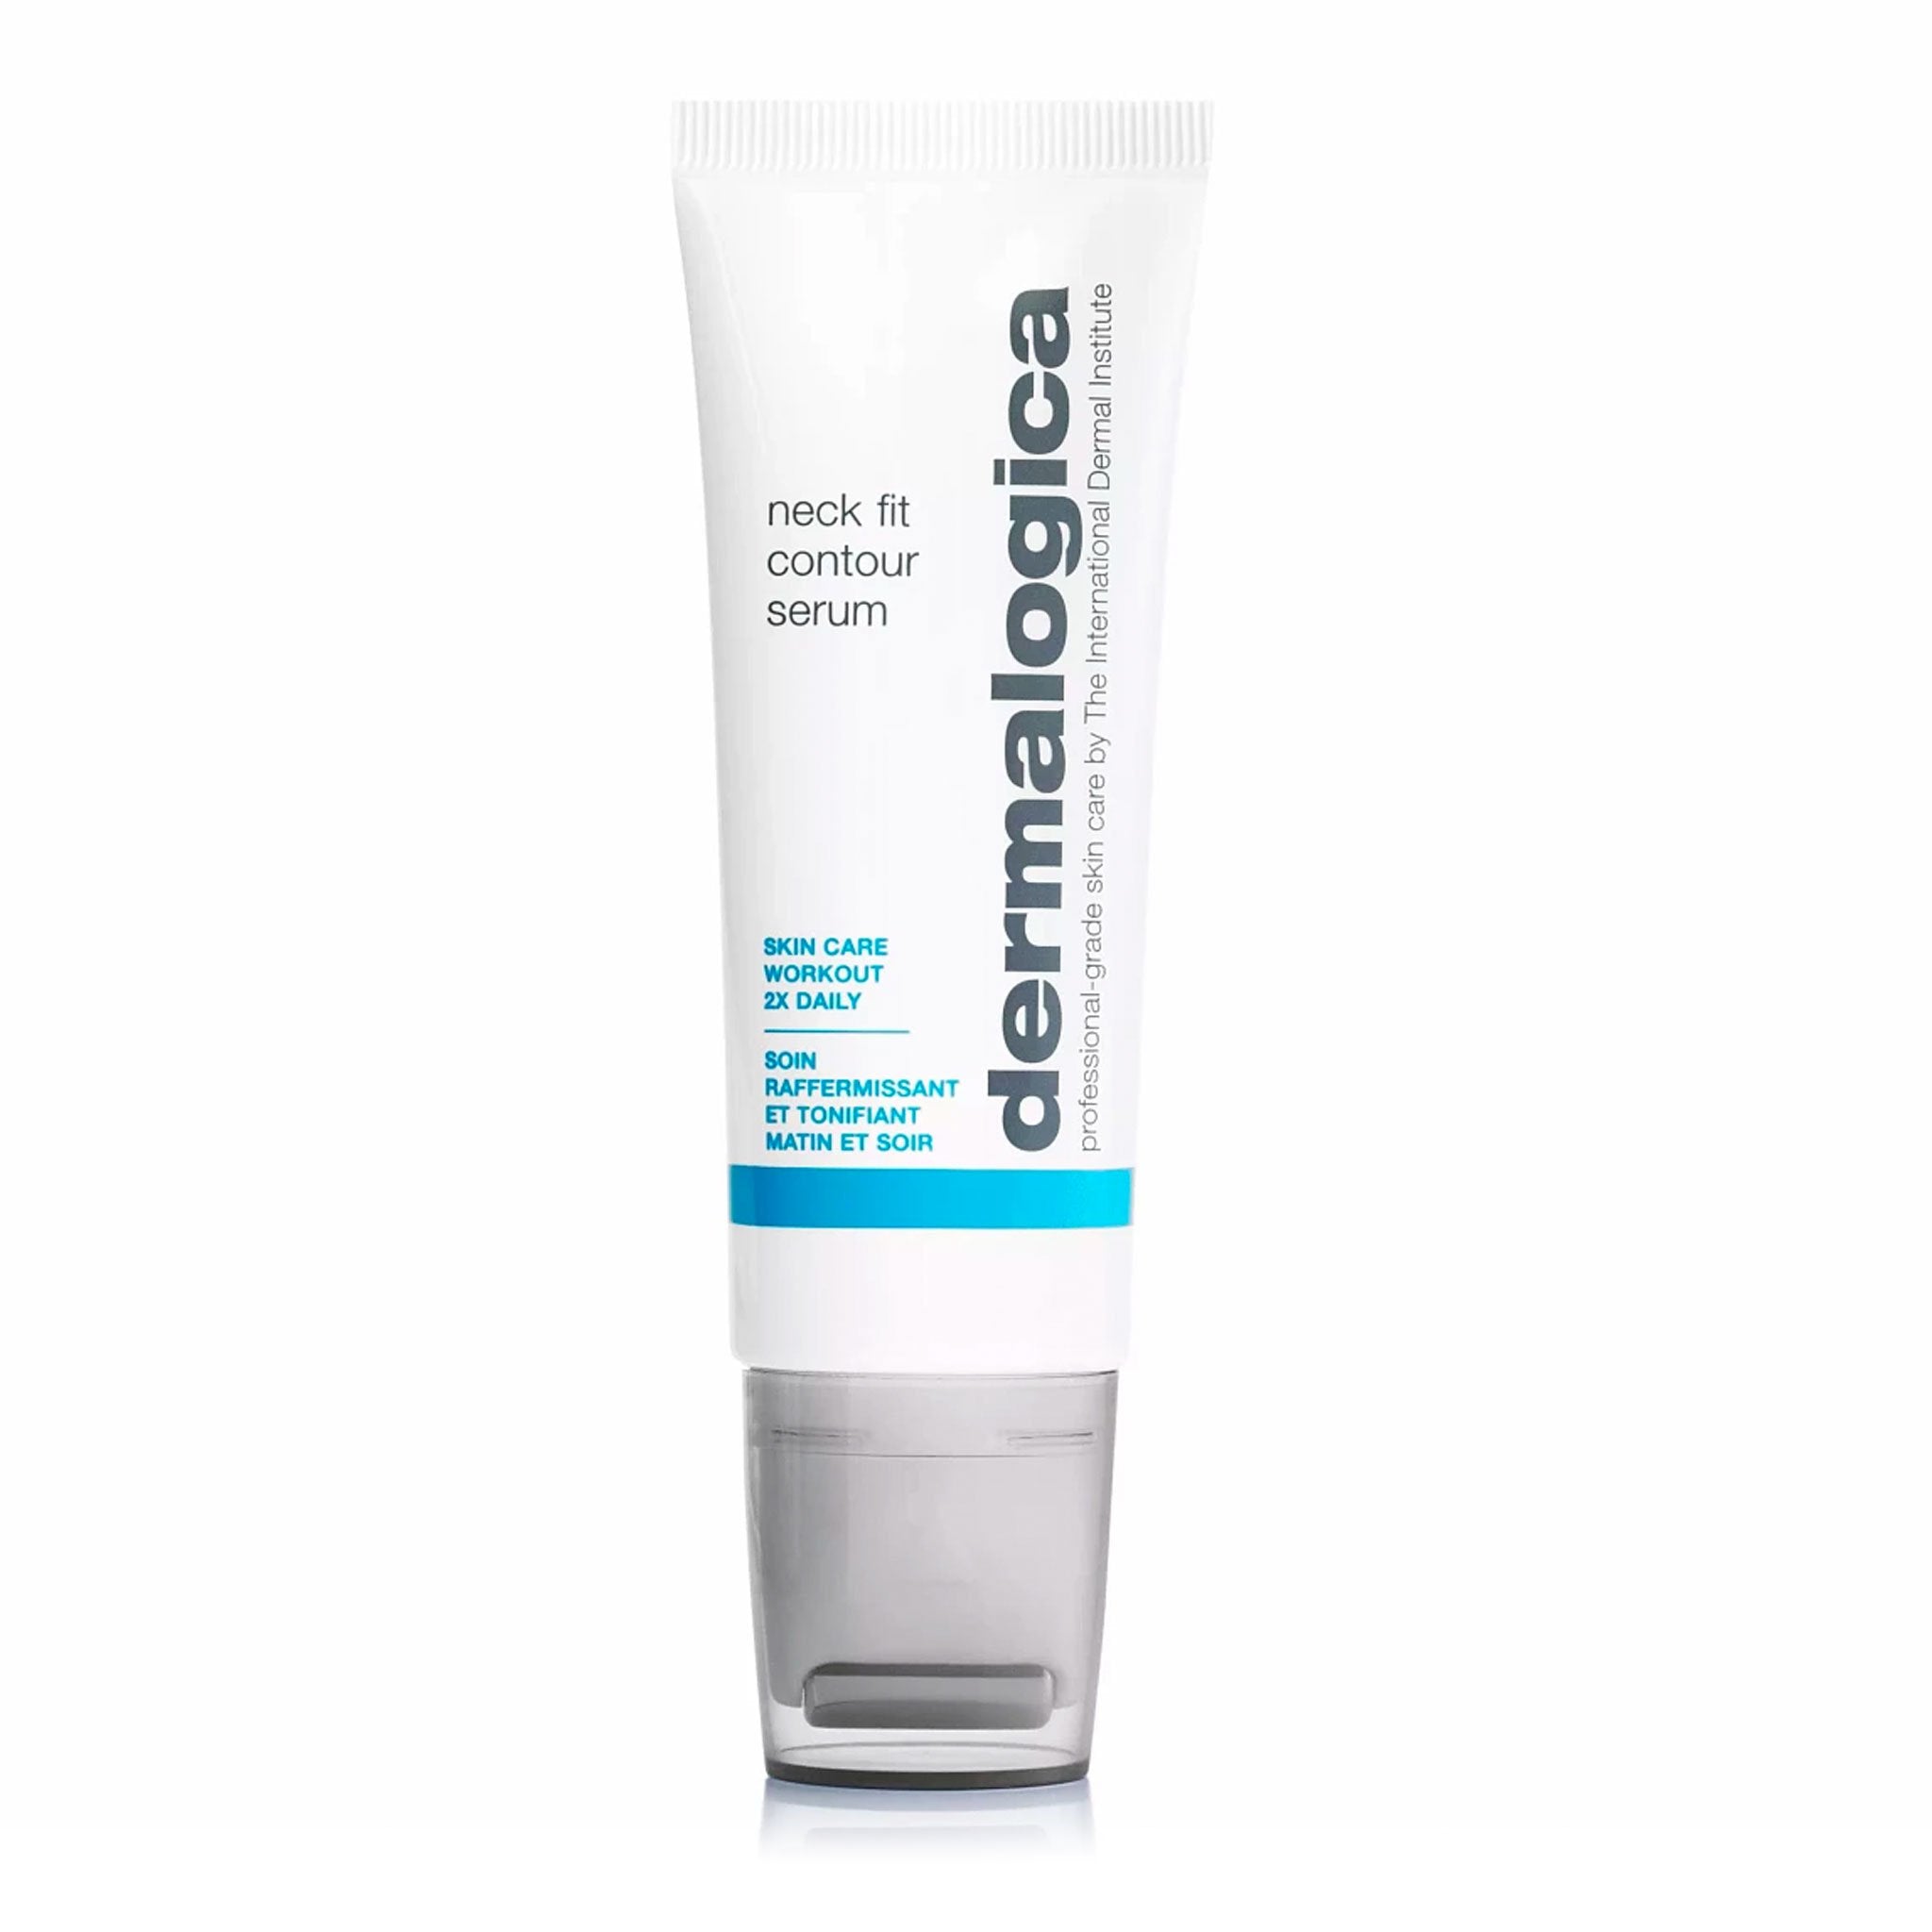 FREE GIFT FULL SIZE Dermalogica neck fit contour serum 50ml